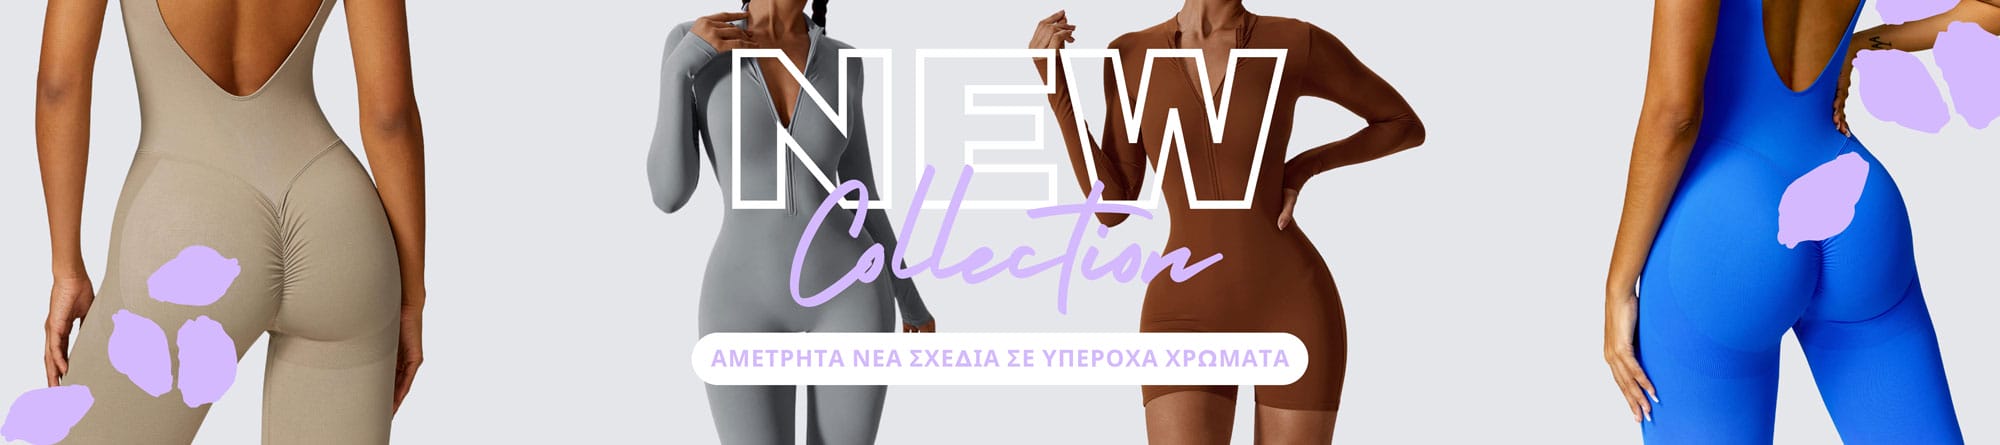 Fitness Collection Banner